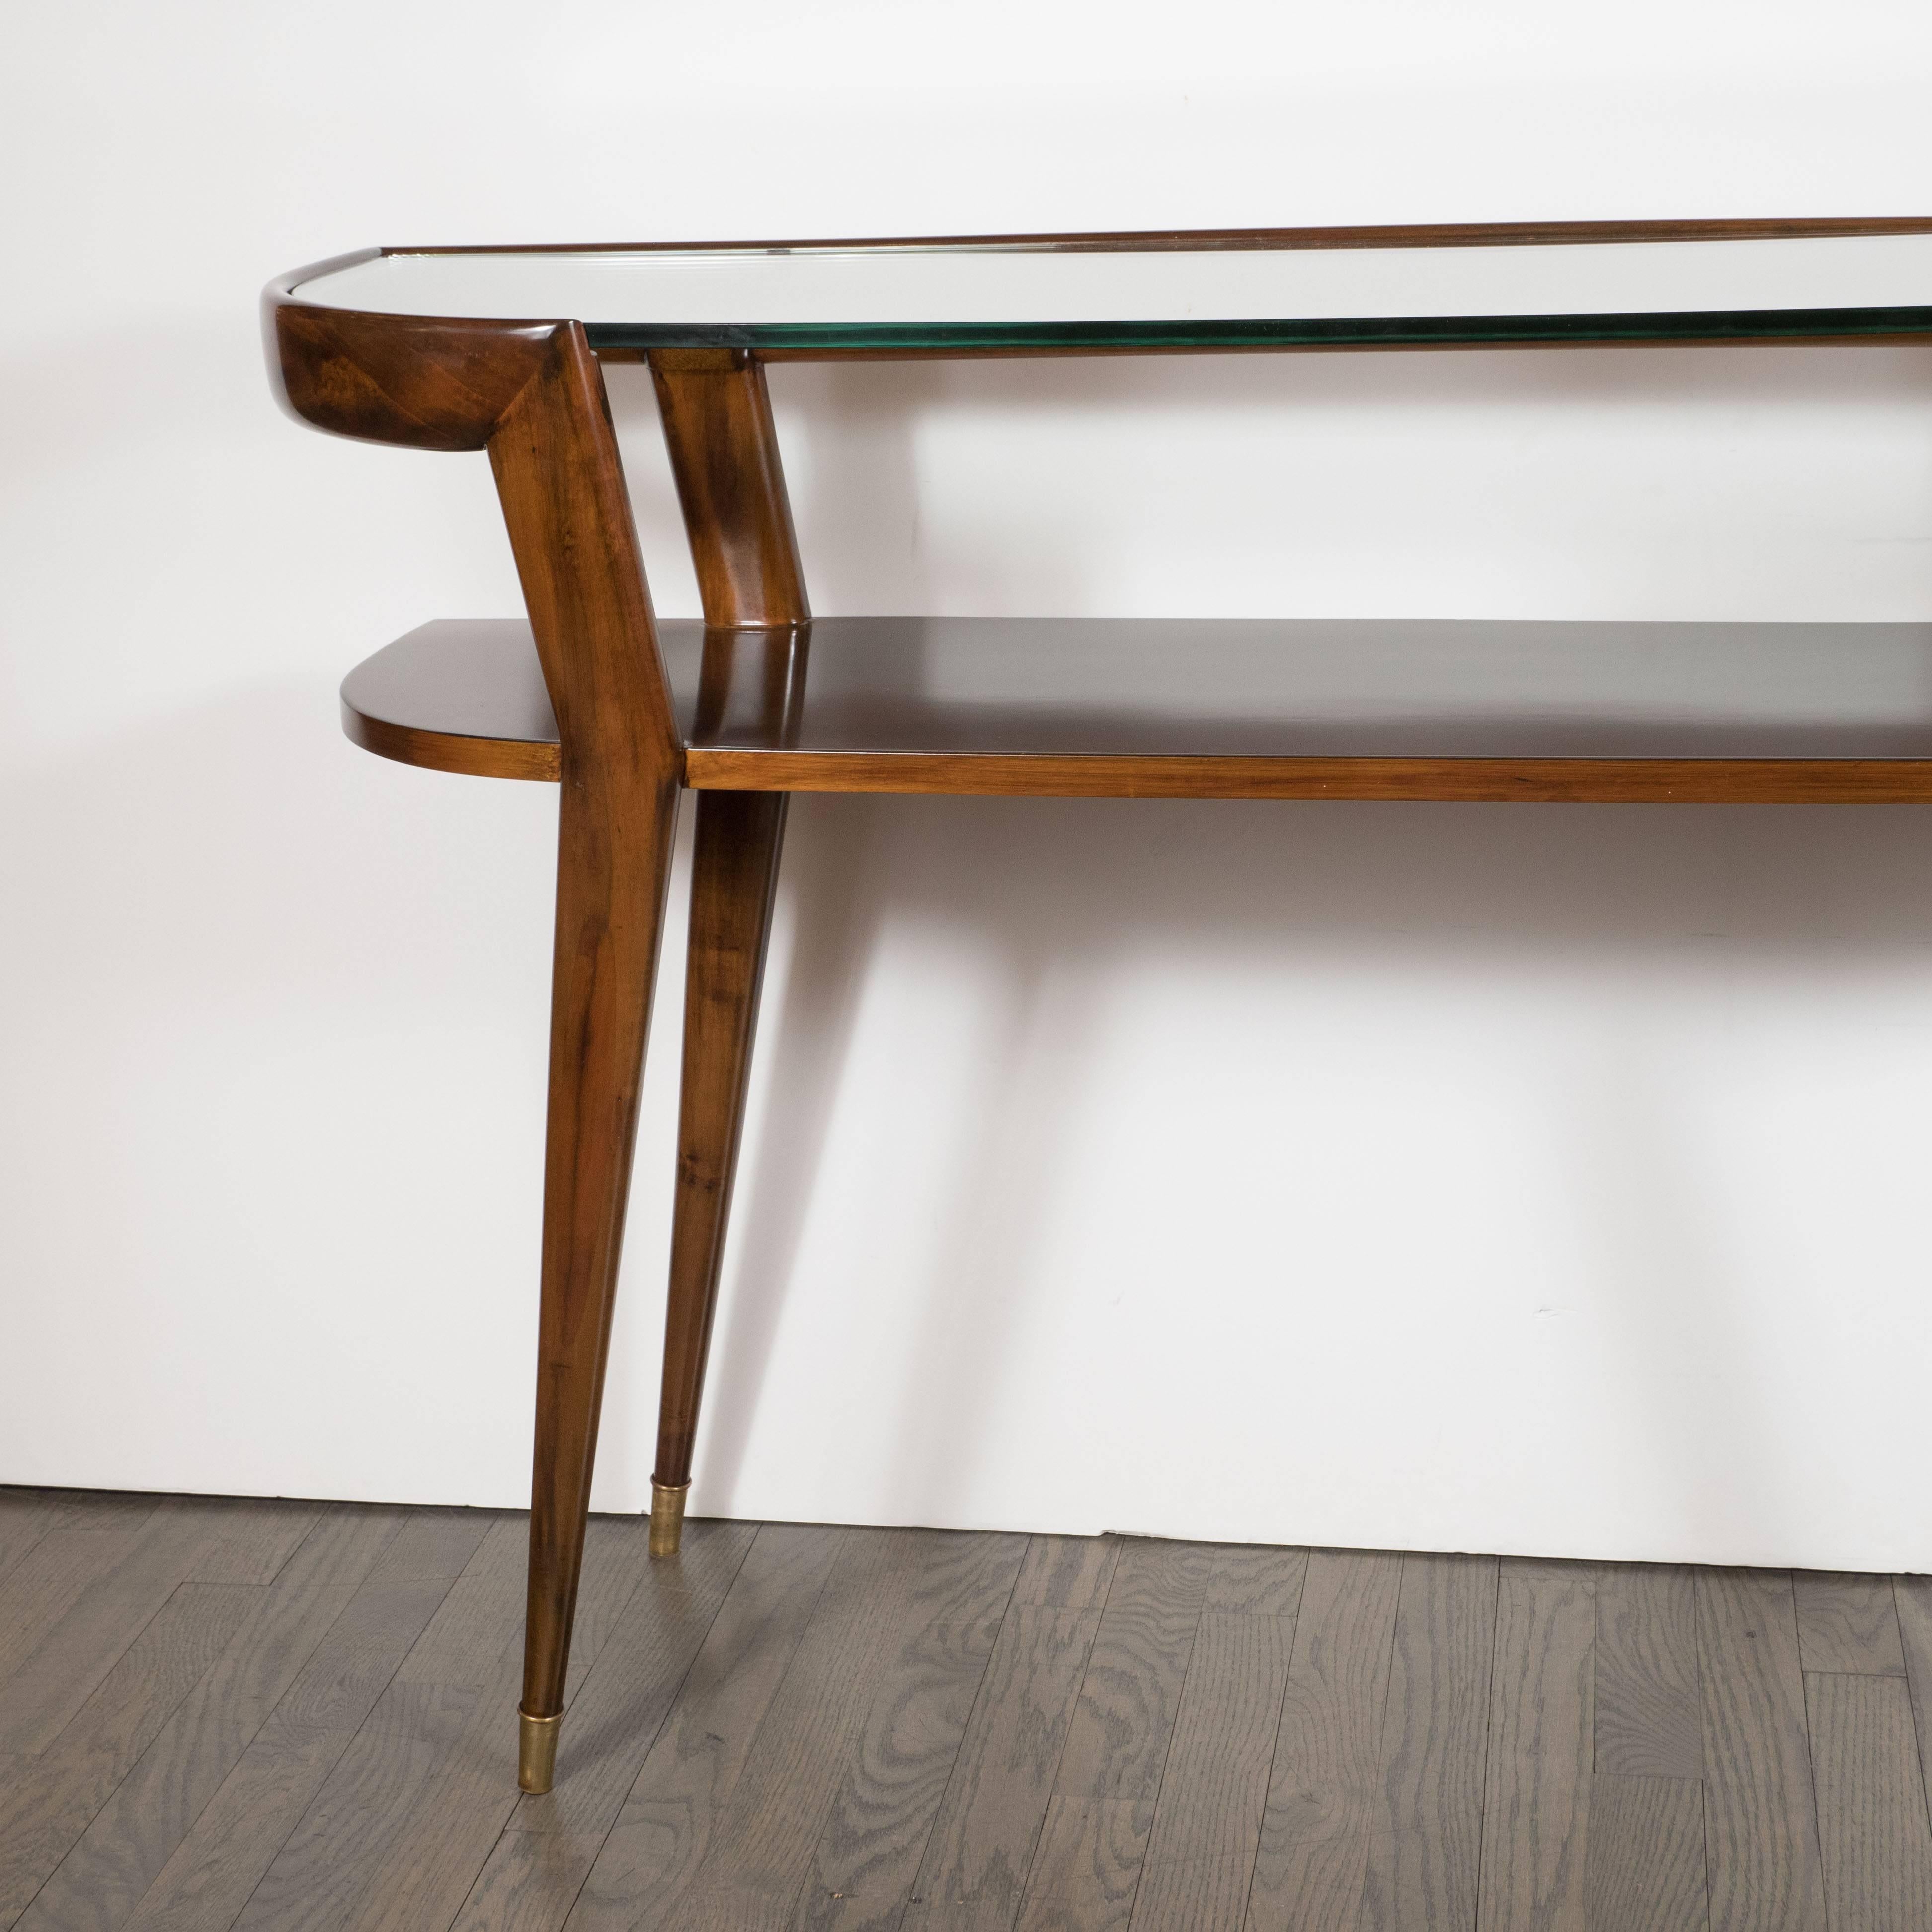 This very sophisticated Mid-century modernist two-tier console table in hand-rubbed walnut with inset glass top and brass sabots. The piece has been mint restored and in excellent condition.
Italian, circa 1950
Measures: 31.5 height
47.5